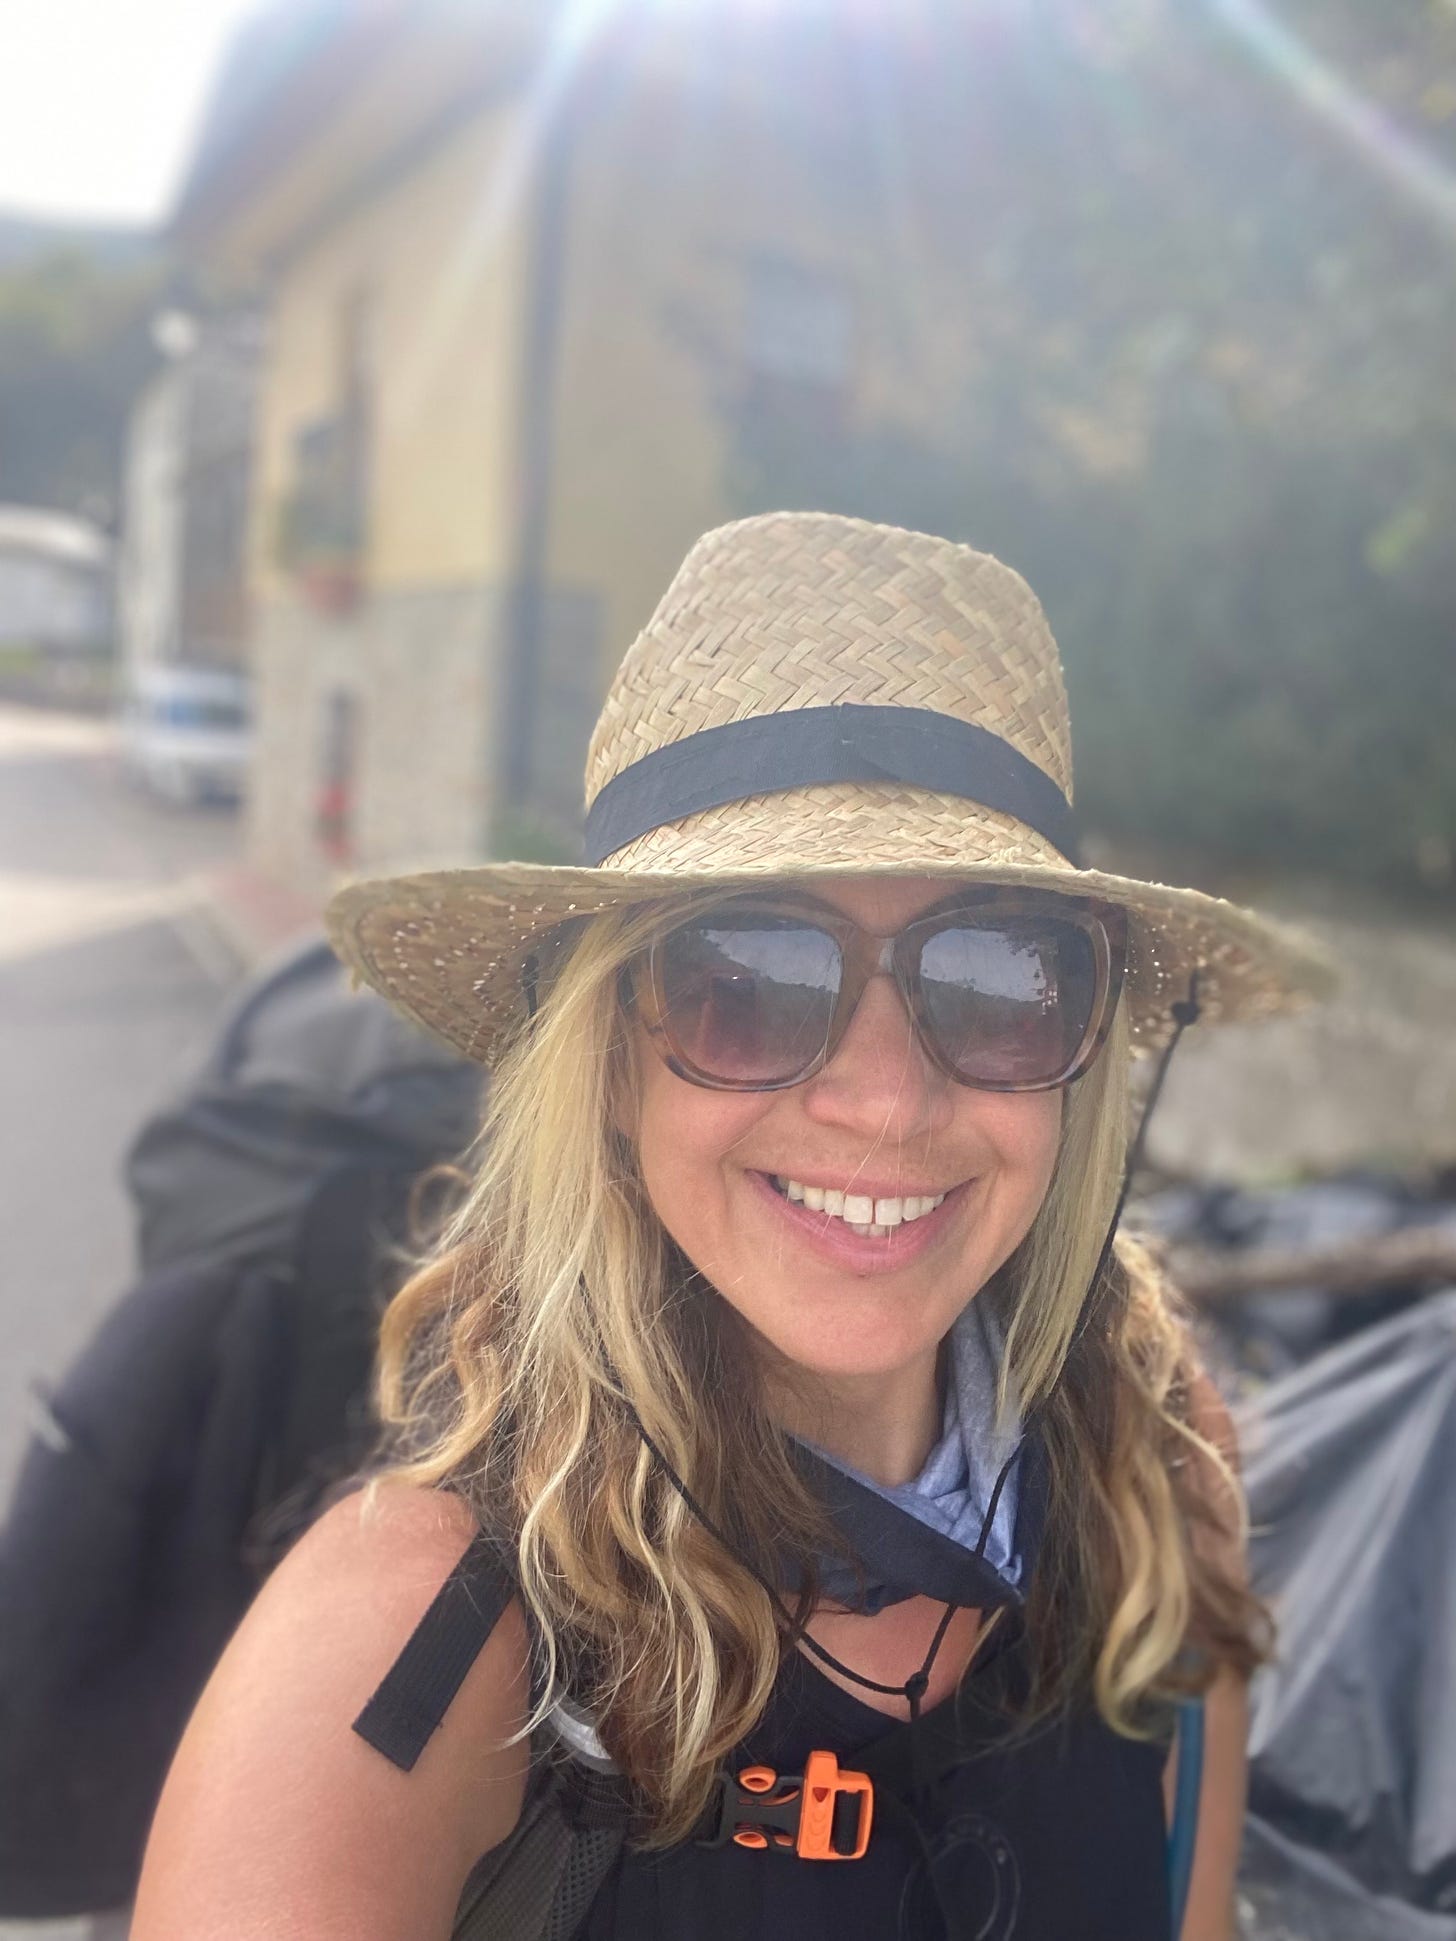 A woman in a hat and sunglasses, wearing a backpack smiles, pausing on her walk of the Camino de Santiago.